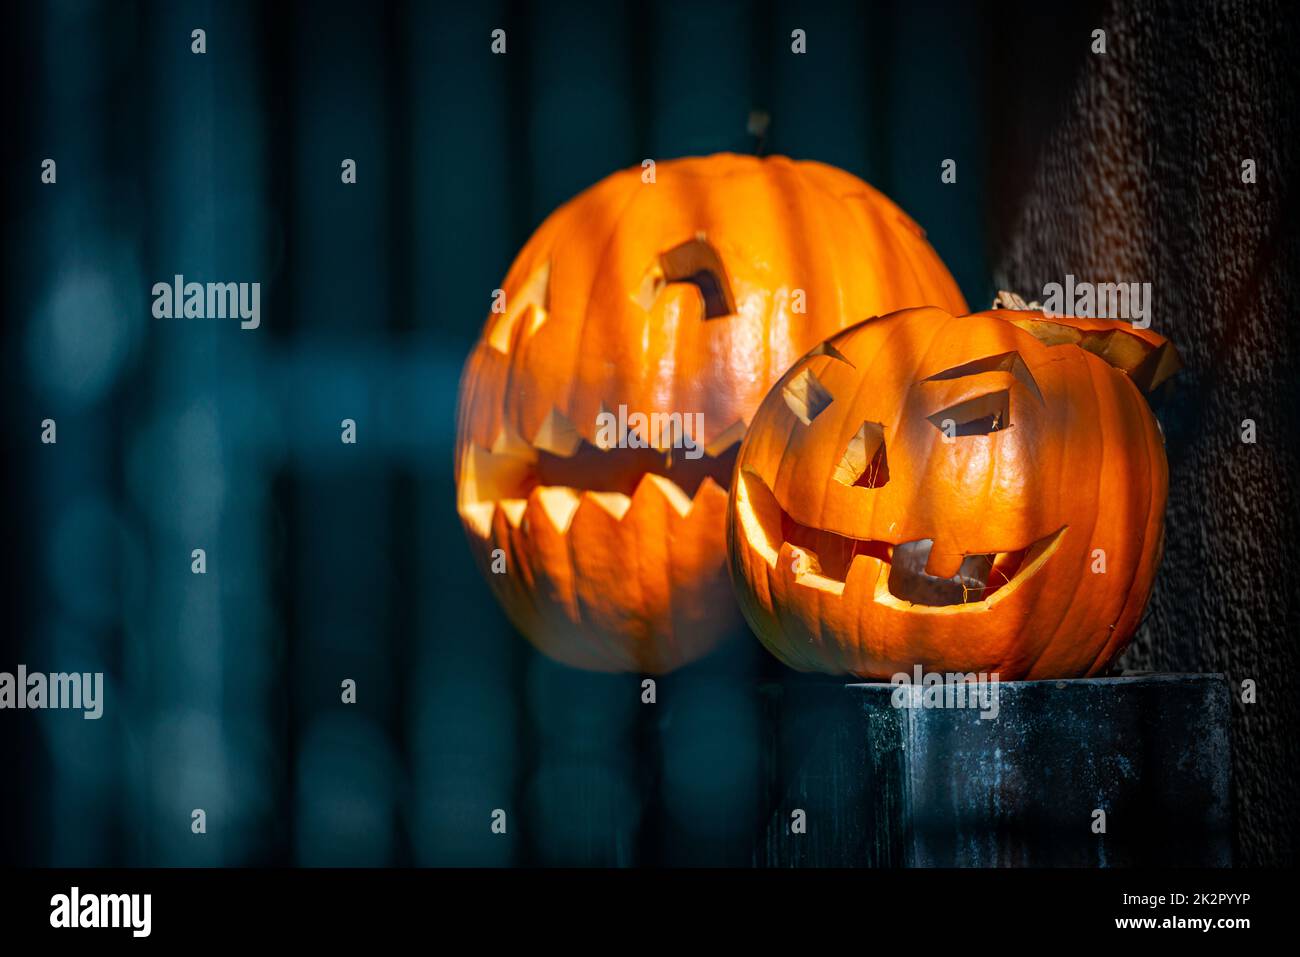 Two pumpkins carved for Halloween celebraiton Stock Photo